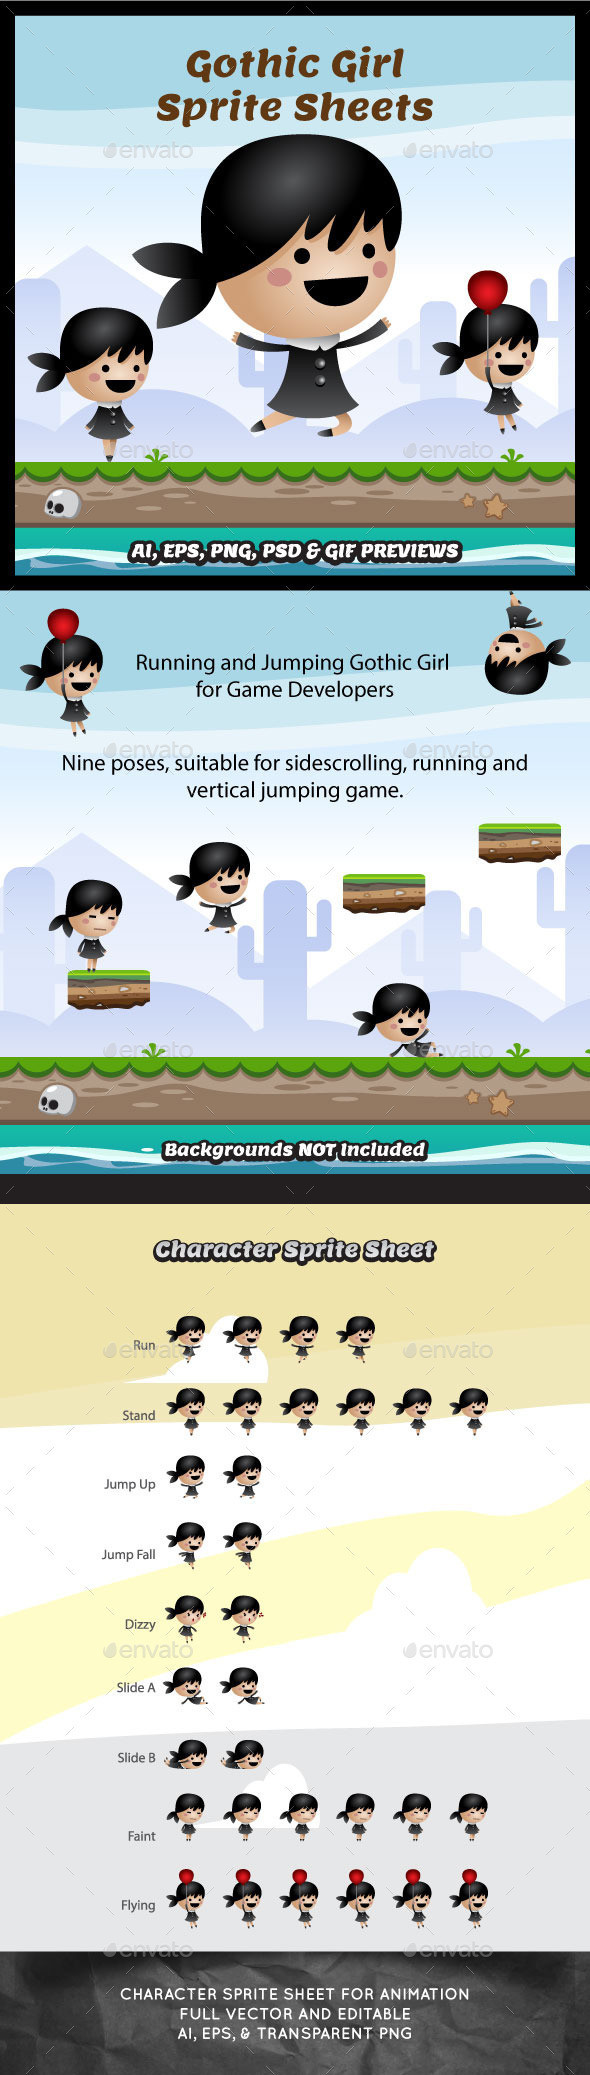 Running and jumping gothic girl game character sprite sheet sidescroller game asset mobile games gameart game art 590